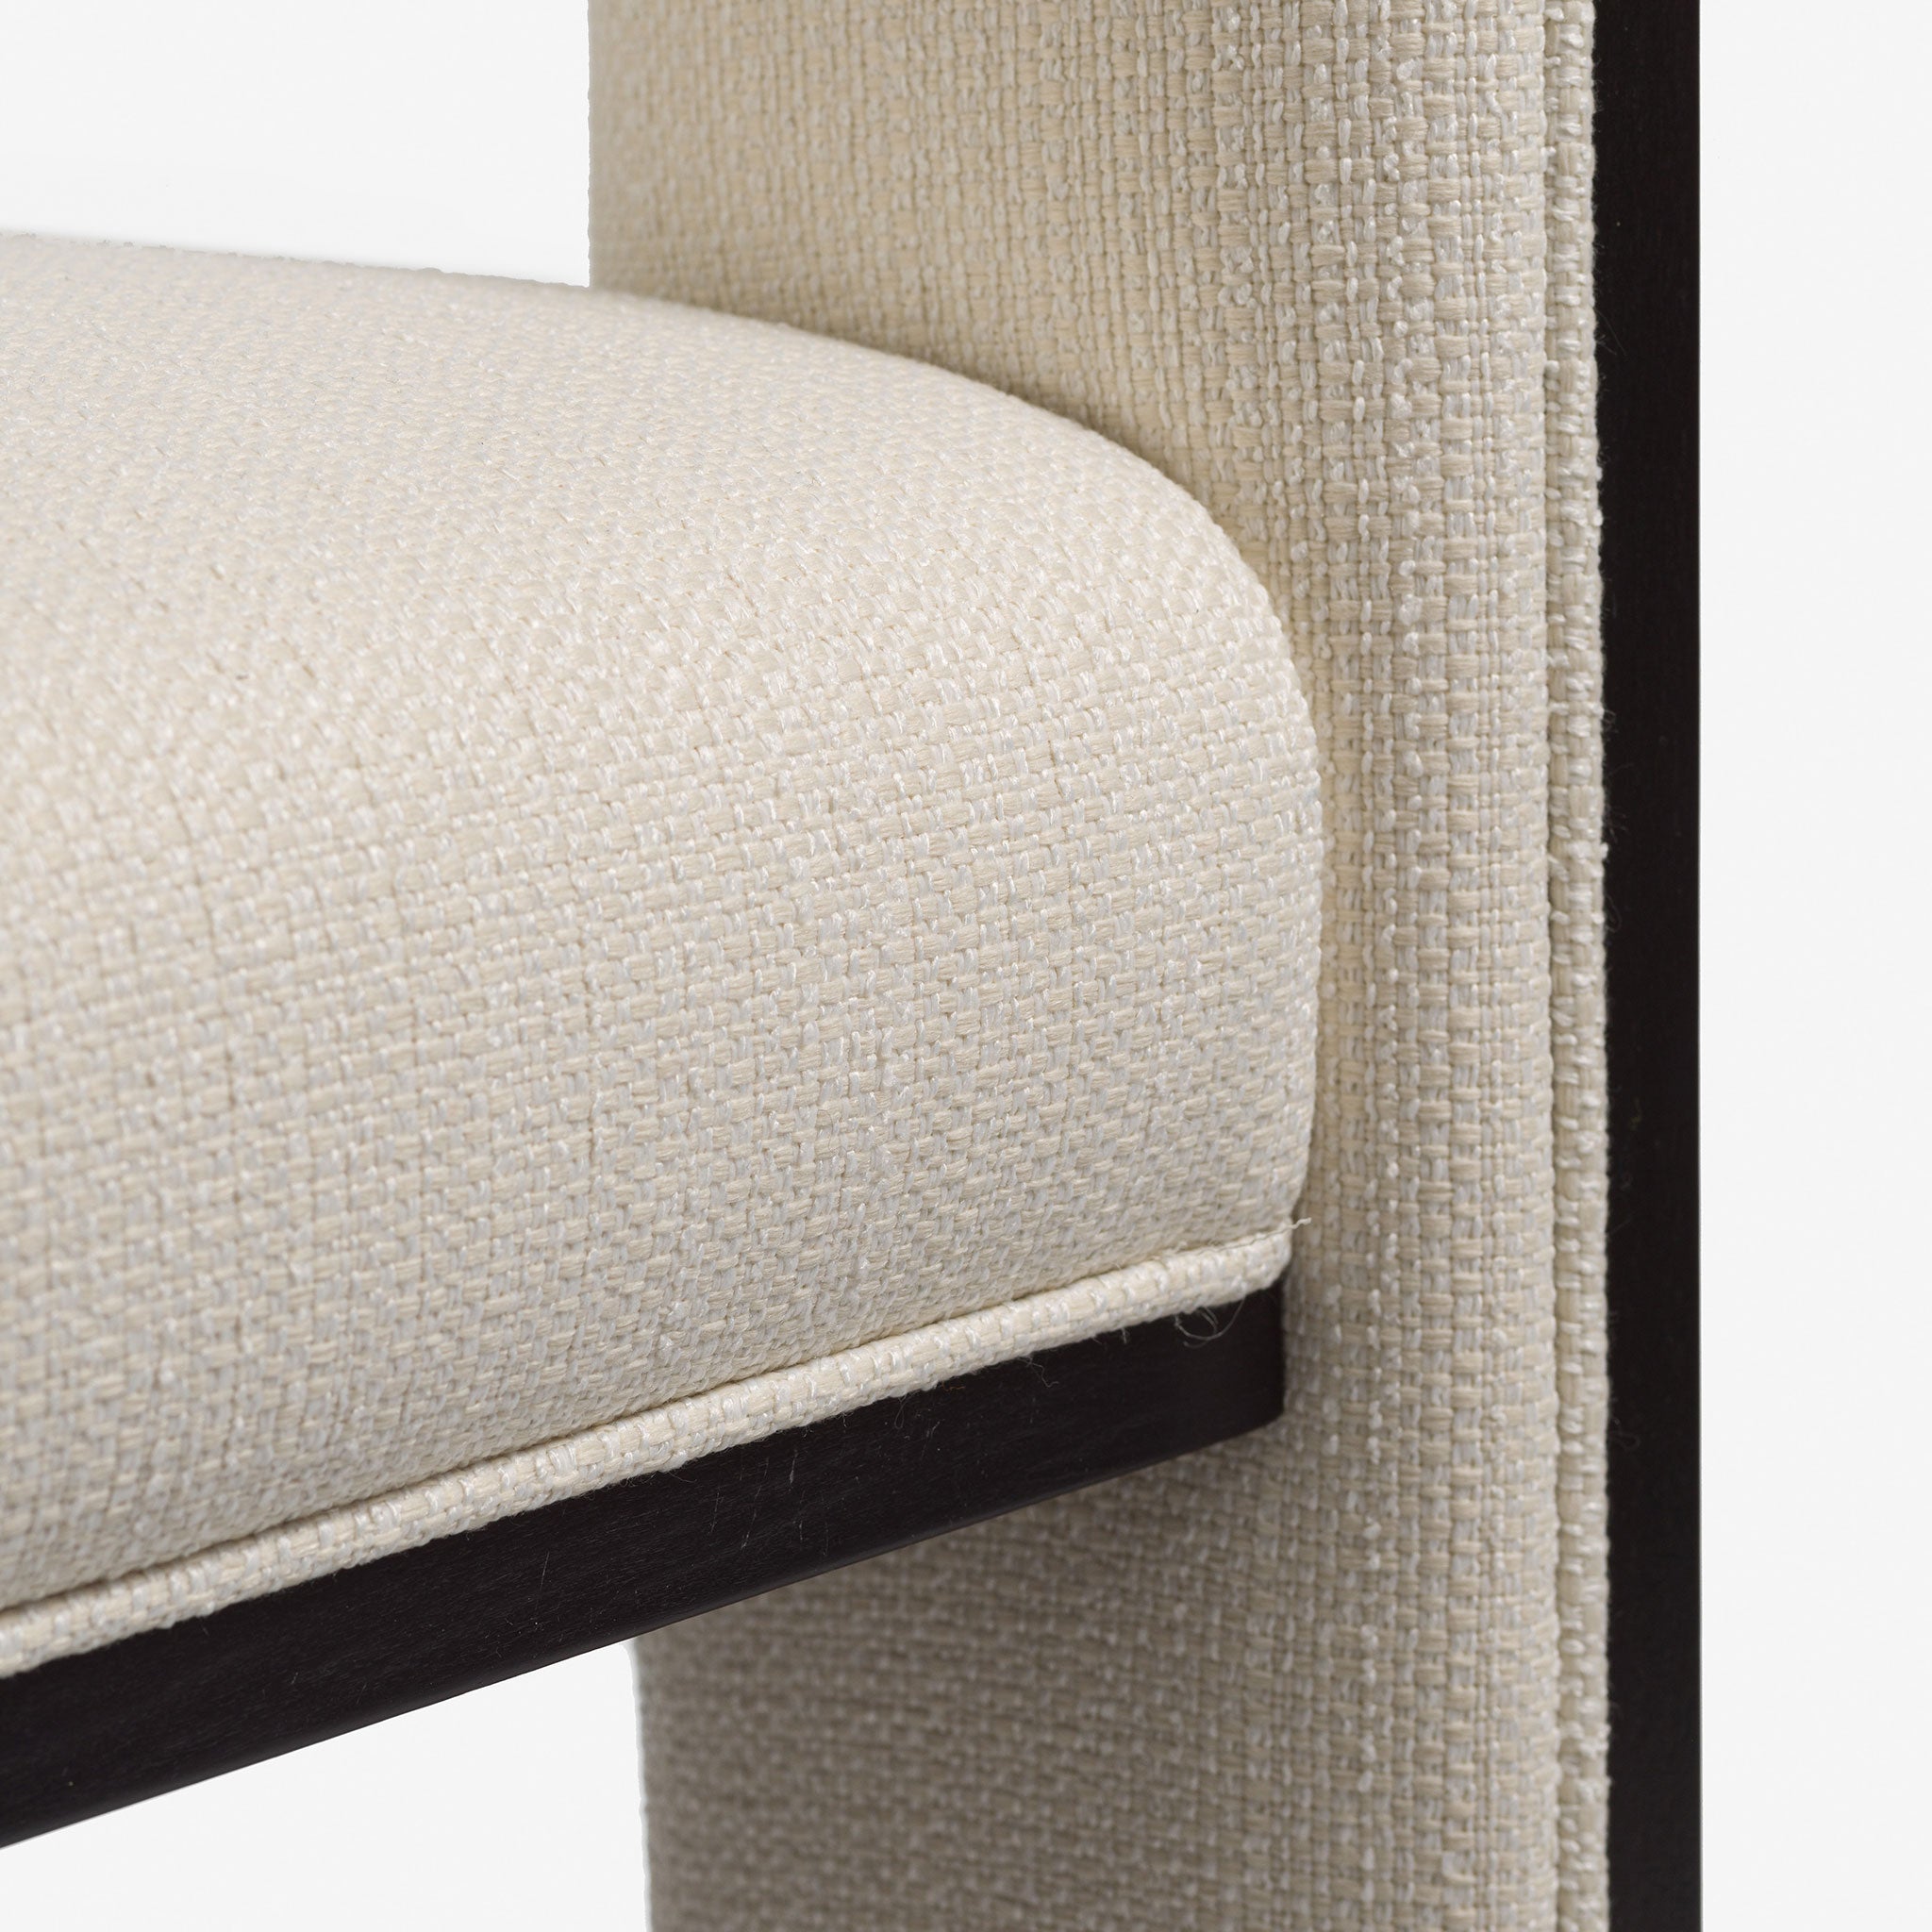 Luxury furniture, Sophisticated Dining Chair, Contemporary Design, Modern Design, Upholstery